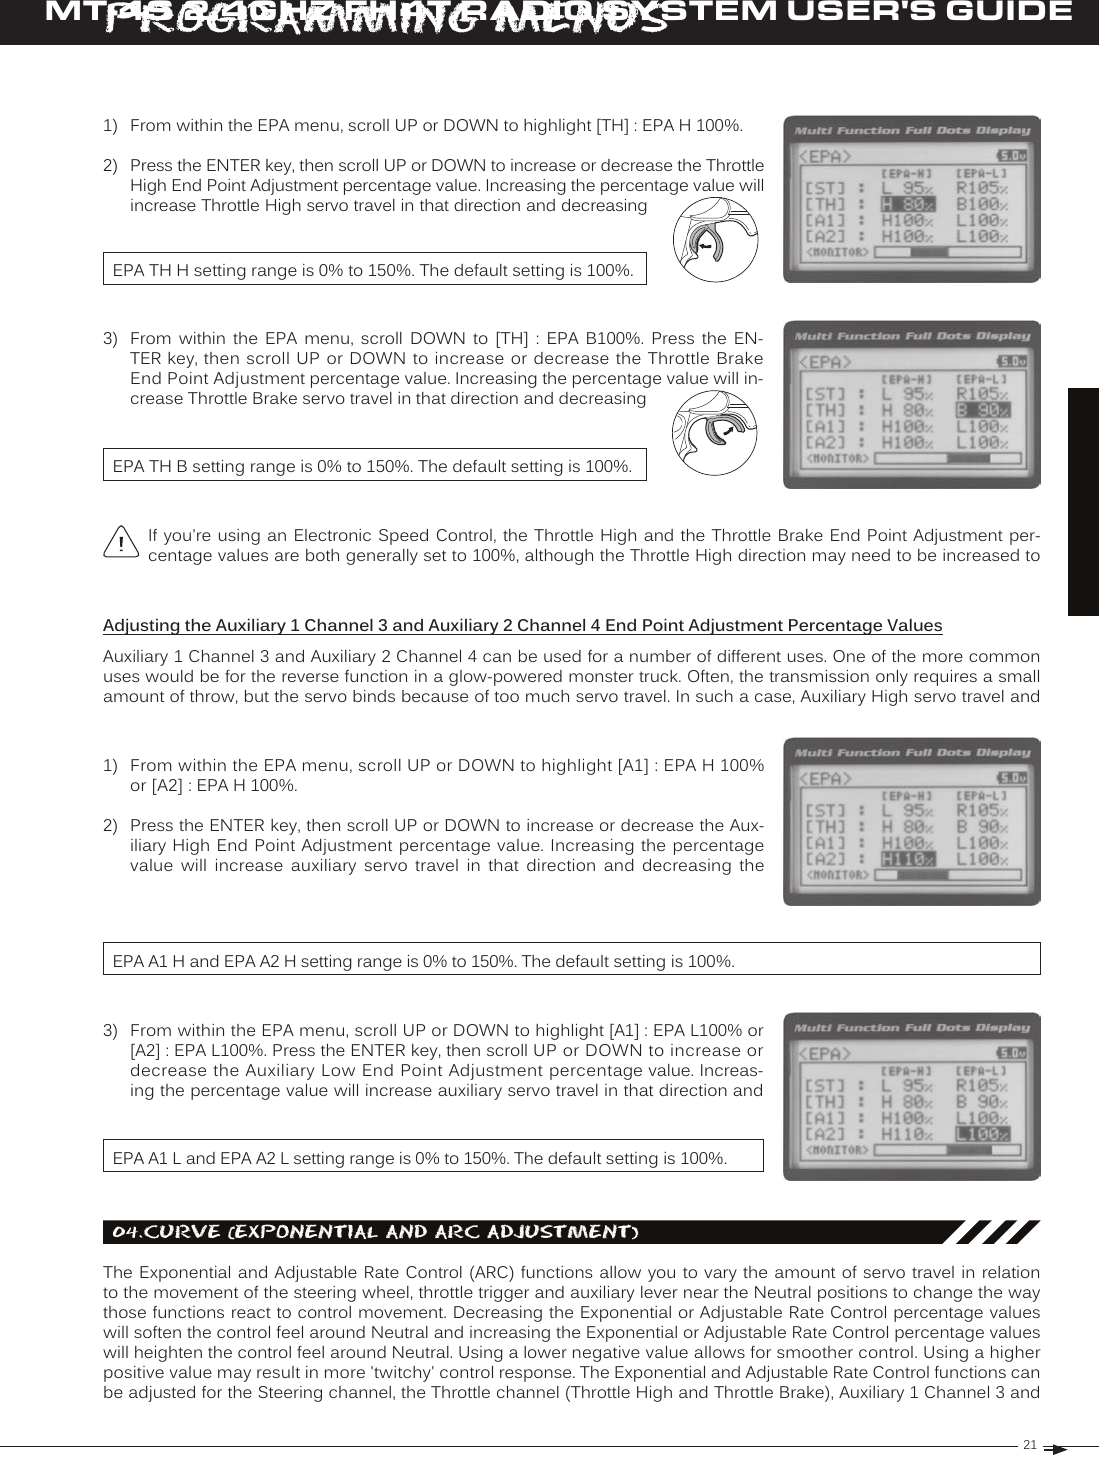 21T RMT-4S 2.4GHZ FH4T RADIO SYSTEM USER&apos;S GUIDE[[ProGraMMinG MenuSIf you&apos;re using an Electronic  Speed  Control, the Throttle High and the  Throttle  Brake End Point Adjustment per-centage values are both generally set to 100%, although the Throttle High direction may need to be increased to 1)  From within the EPA menu, scroll UP or DOWN to highlight [TH] : EPA H 100%.2)  Press the ENTER key, then scroll UP or DOWN to increase or decrease the Throttle High End Point Adjustment percentage value. Increasing the percentage value will increase Throttle High servo travel in that direction and decreasing EPA TH H setting range is 0% to 150%. The default setting is 100%.EPA TH B setting range is 0% to 150%. The default setting is 100%.3)  From  within  the  EPA  menu,  scroll  DOWN  to  [TH]  :  EPA  B100%.  Press  the  EN-TER key, then scroll UP or DOWN to increase or decrease the Throttle Brake End Point Adjustment percentage value. Increasing the percentage value will in-crease Throttle Brake servo travel in that direction and decreasing Adjusting the Auxiliary 1 Channel 3 and Auxiliary 2 Channel 4 End Point Adjustment Percentage ValuesAuxiliary 1 Channel 3 and Auxiliary 2 Channel 4 can be used for a number of different uses. One of the more common uses would be for the reverse function in a glow-powered monster truck. Often, the transmission only requires a small amount of throw, but the servo binds because of too much servo travel. In such a case, Auxiliary High servo travel and 1)  From within the EPA menu, scroll UP or DOWN to highlight [A1] : EPA H 100% or [A2] : EPA H 100%.2)  Press the ENTER key, then scroll UP or DOWN to increase or decrease the Aux-iliary High End Point Adjustment percentage value. Increasing the percentage value  will  increase  auxiliary  servo  travel  in  that  direction  and  decreasing  the EPA A1 H and EPA A2 H setting range is 0% to 150%. The default setting is 100%.EPA A1 L and EPA A2 L setting range is 0% to 150%. The default setting is 100%.3)  From within the EPA menu, scroll UP or DOWN to highlight [A1] : EPA L100% or [A2] : EPA L100%. Press the ENTER key, then scroll UP or DOWN to increase or decrease the Auxiliary Low End Point Adjustment percentage value. Increas-ing the percentage value will increase auxiliary servo travel in that direction and 04.Curve (eXPonential and arC adjuStMent)The Exponential and Adjustable  Rate  Control (ARC) functions allow you to  vary  the amount of servo travel in relation to the movement of the steering wheel, throttle trigger and auxiliary lever near the Neutral positions to change the way those functions react to control movement. Decreasing the Exponential or Adjustable Rate Control percentage values will soften the control feel around Neutral and increasing the Exponential or Adjustable Rate Control percentage values will heighten the control feel around Neutral. Using a lower negative value allows for smoother control. Using a higher positive value may result in more &apos;twitchy&apos; control response. The Exponential and Adjustable Rate Control functions can be adjusted for the Steering channel, the Throttle channel (Throttle High and Throttle Brake), Auxiliary 1 Channel 3 and 